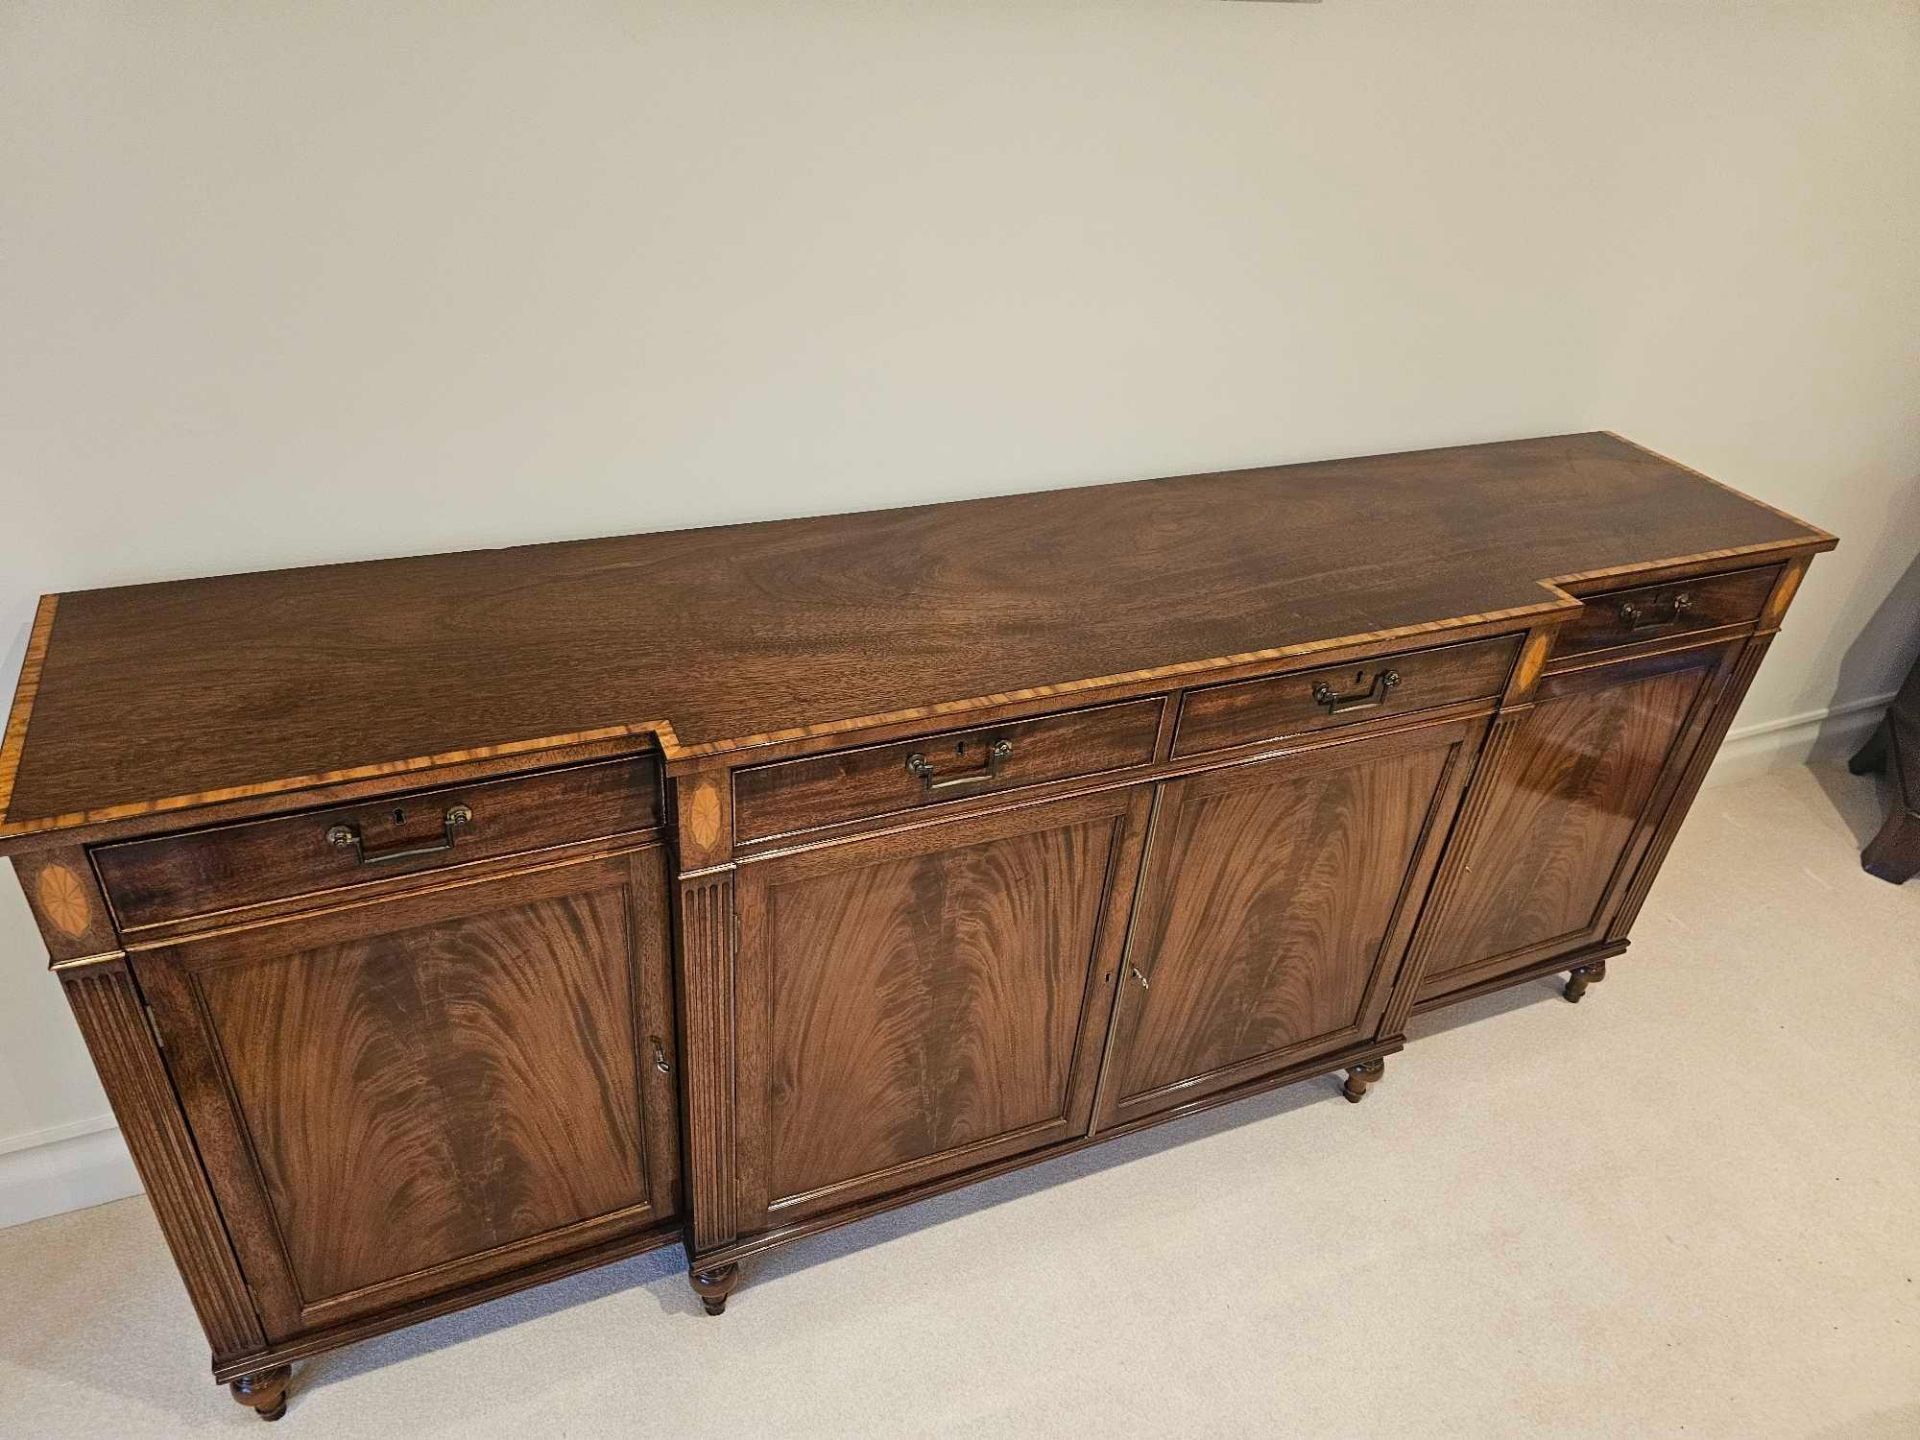 William Tillman George III Style Flame Mahogany Crossbanded In Satinwood Sideboard The Shaped Top - Image 3 of 9